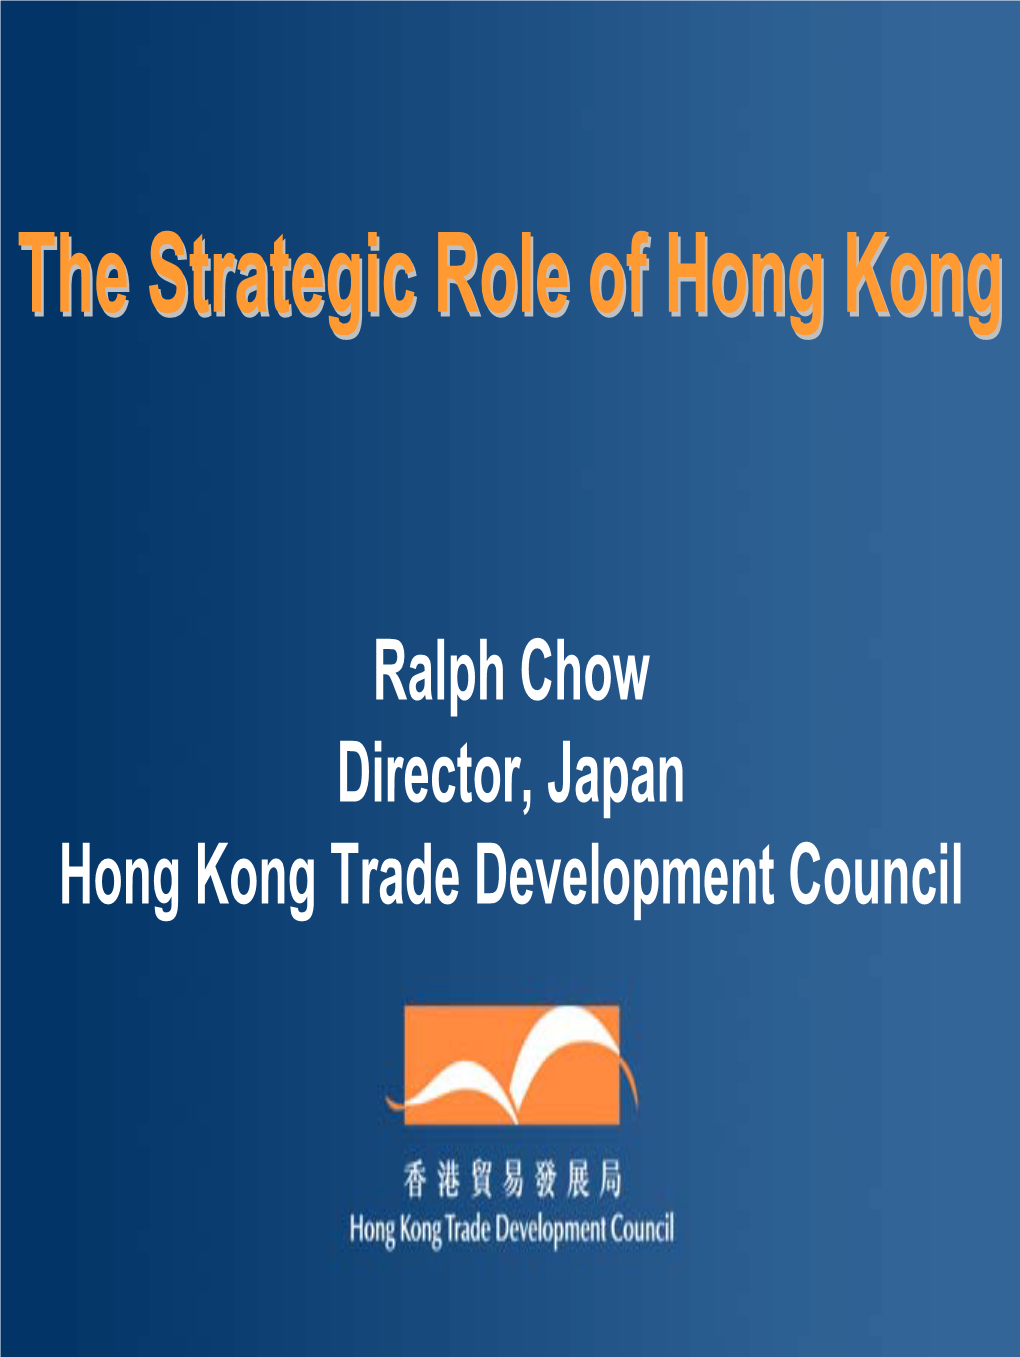 The Strategic Role of Hong Kong